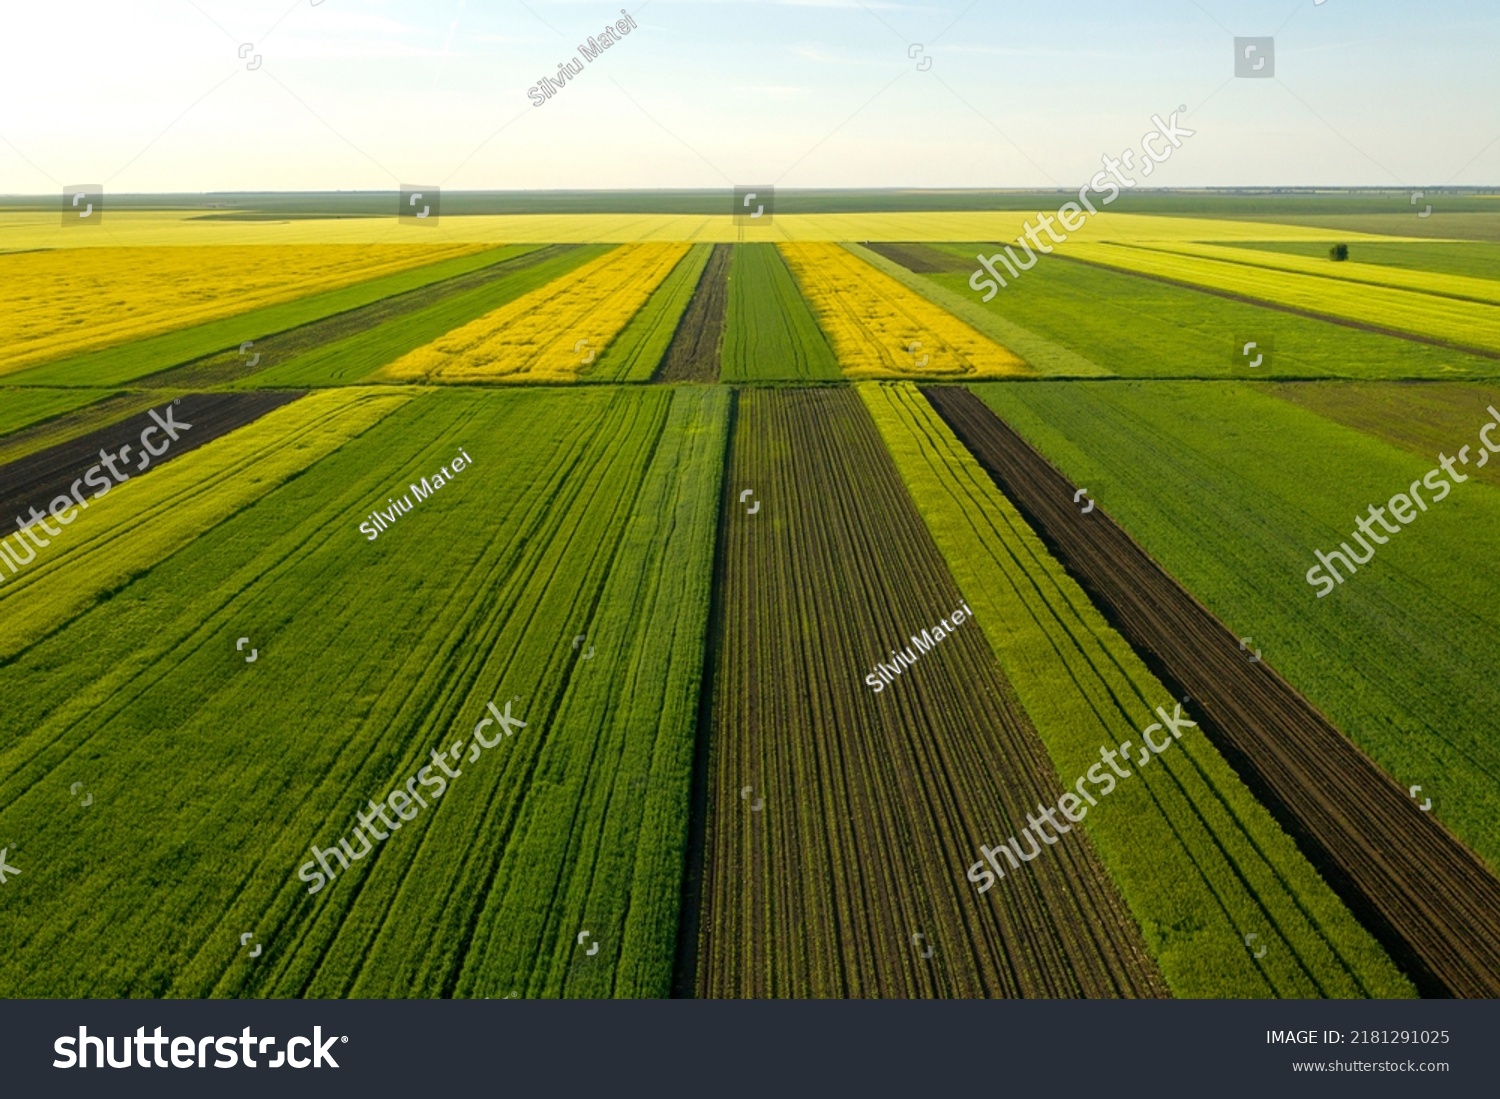 Aerial view with the  landscape geometry texture of a lot of agriculture fields with different plants like rapeseed in blooming season and green wheat. Farming and agriculture industry. #2181291025